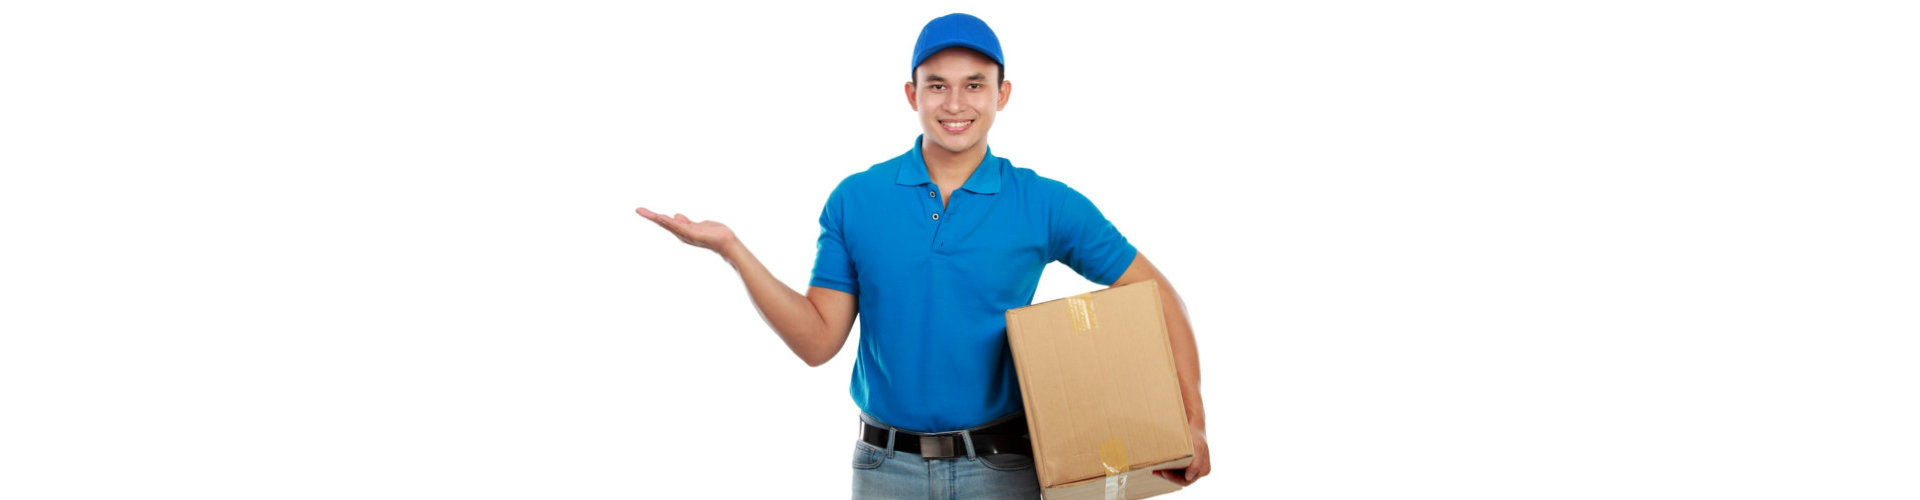 portrait of smiling delivery man of with package